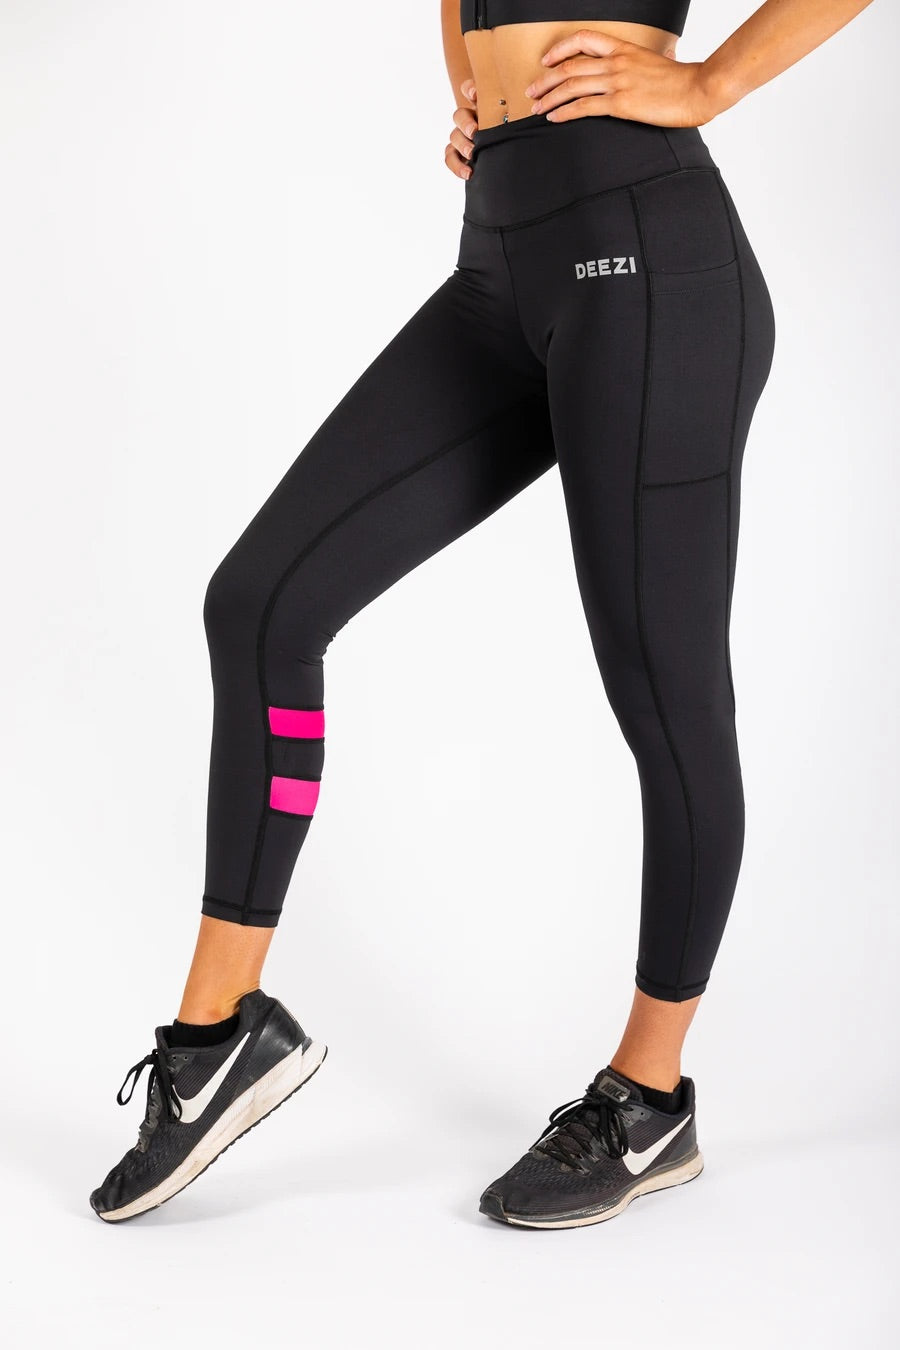 Deezi Active BFF Pink Stripe Leggings with Pockets